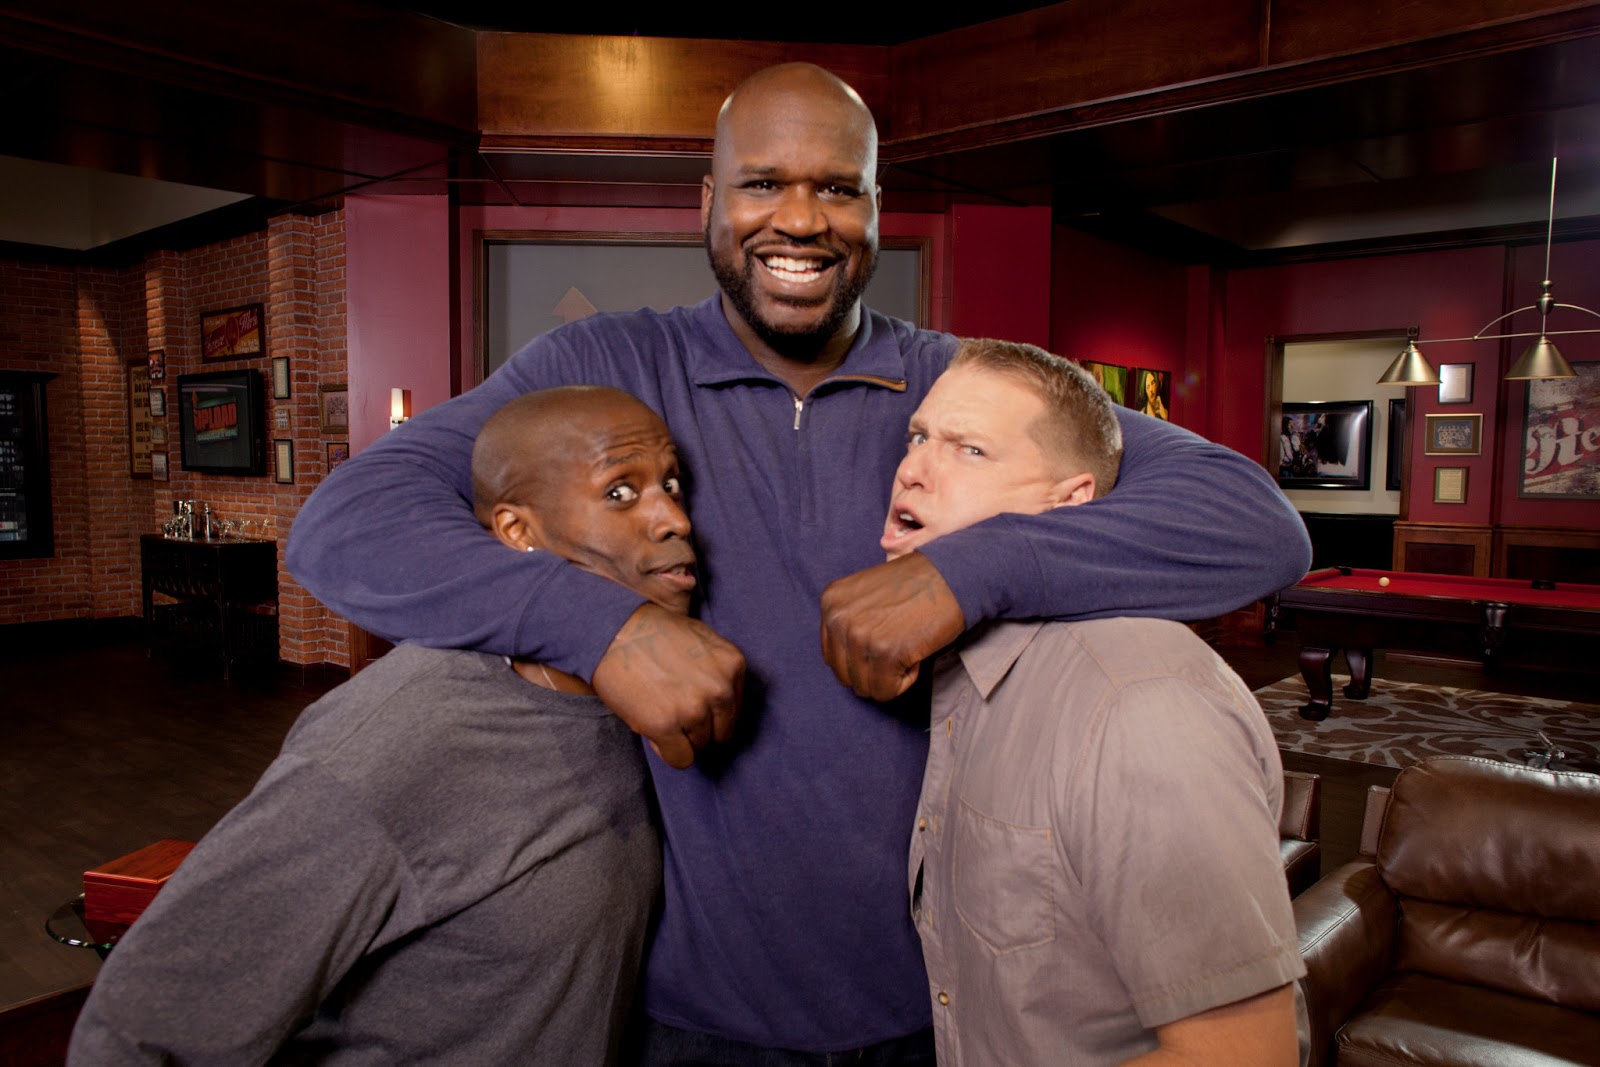 As for Shaq himself, he's propped up by comedians Godfrey and Gary Owe...